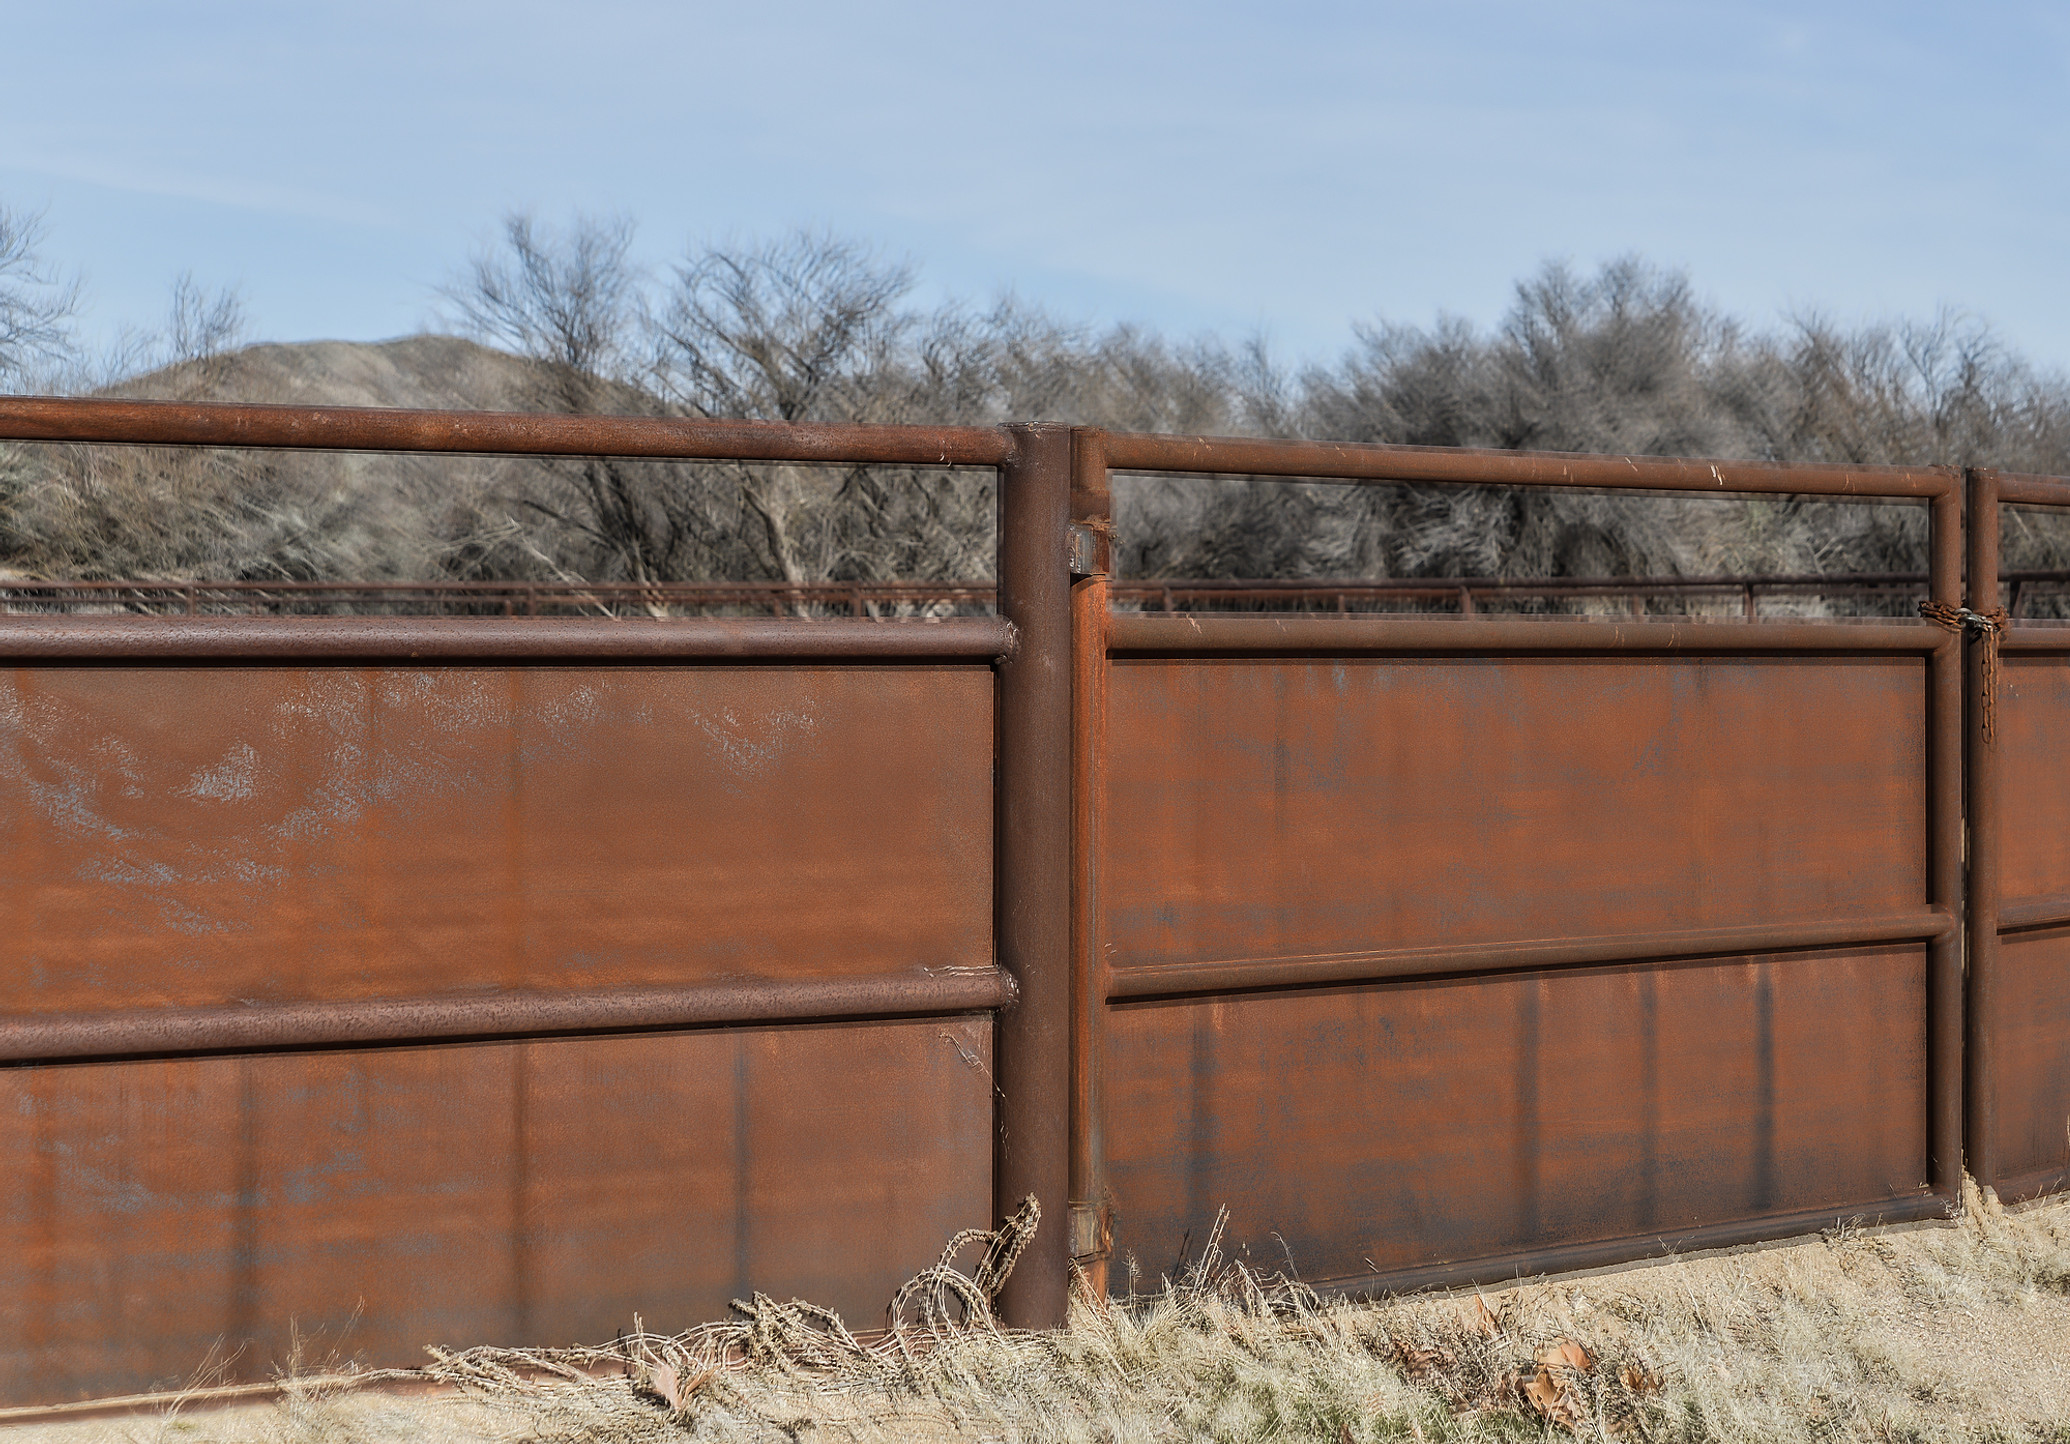 Pipe Fencing & Privacy Fencing Project in Prescott